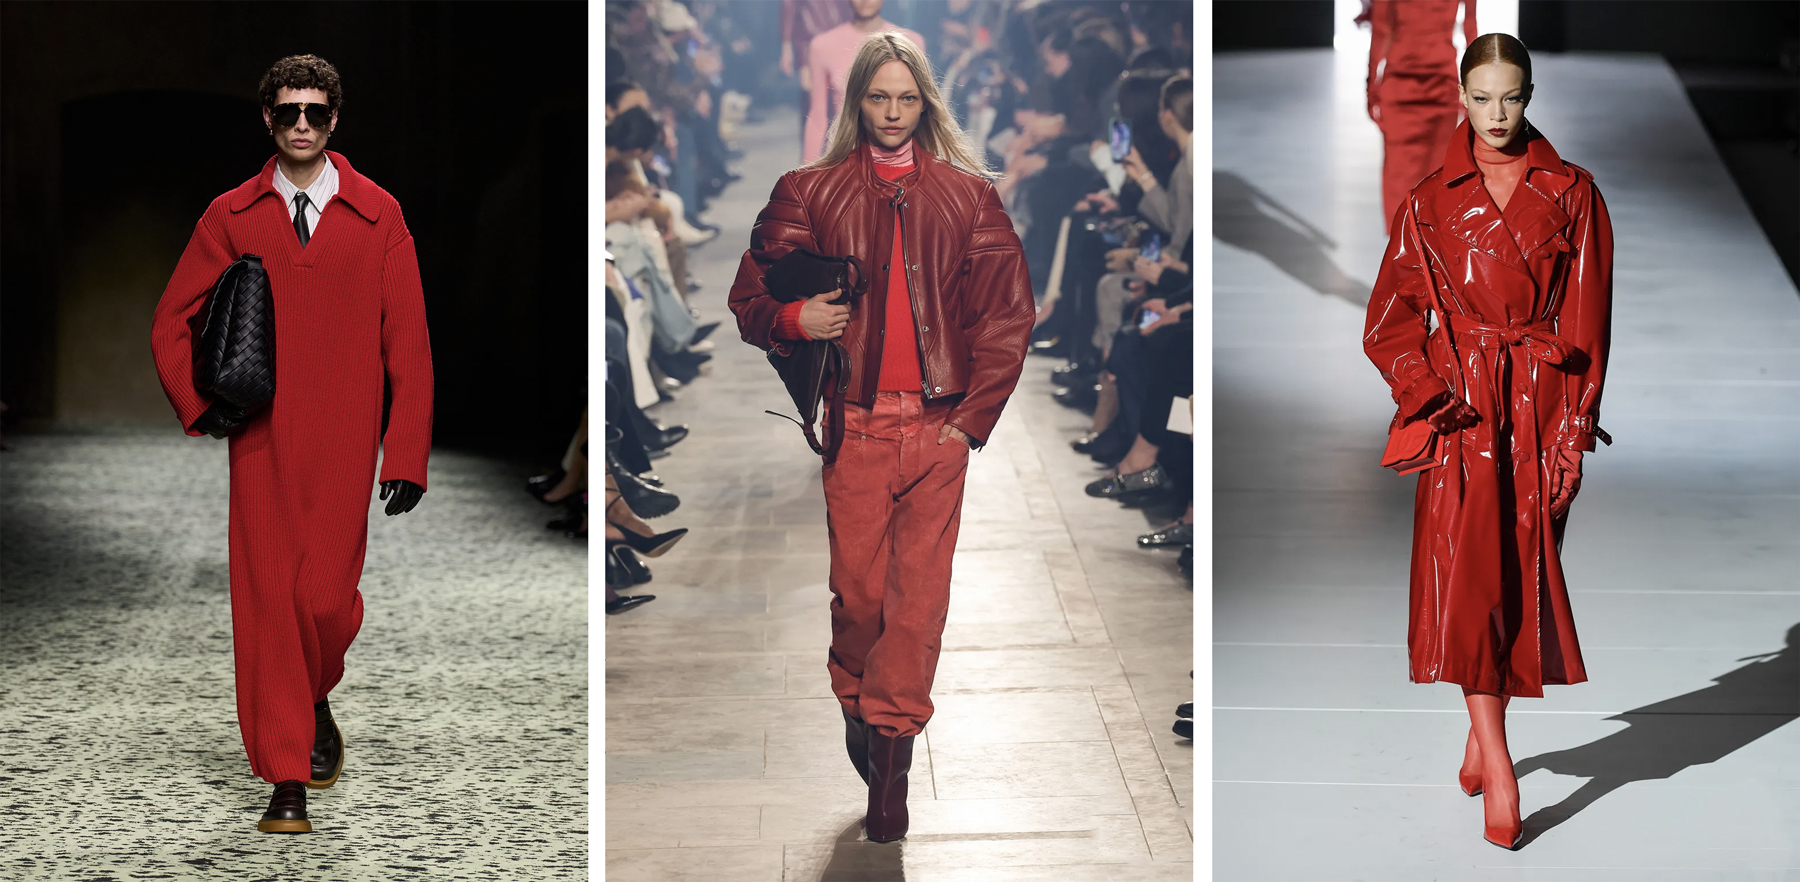 FW23's most popular catwalk pieces. From left to right, a look by Matthieu Blazy for Bottega Veneta from Milan Fashion Week, an Isabel Marant outfit presented in Paris and a Dolce&Gabbana piece on the runway in Milan